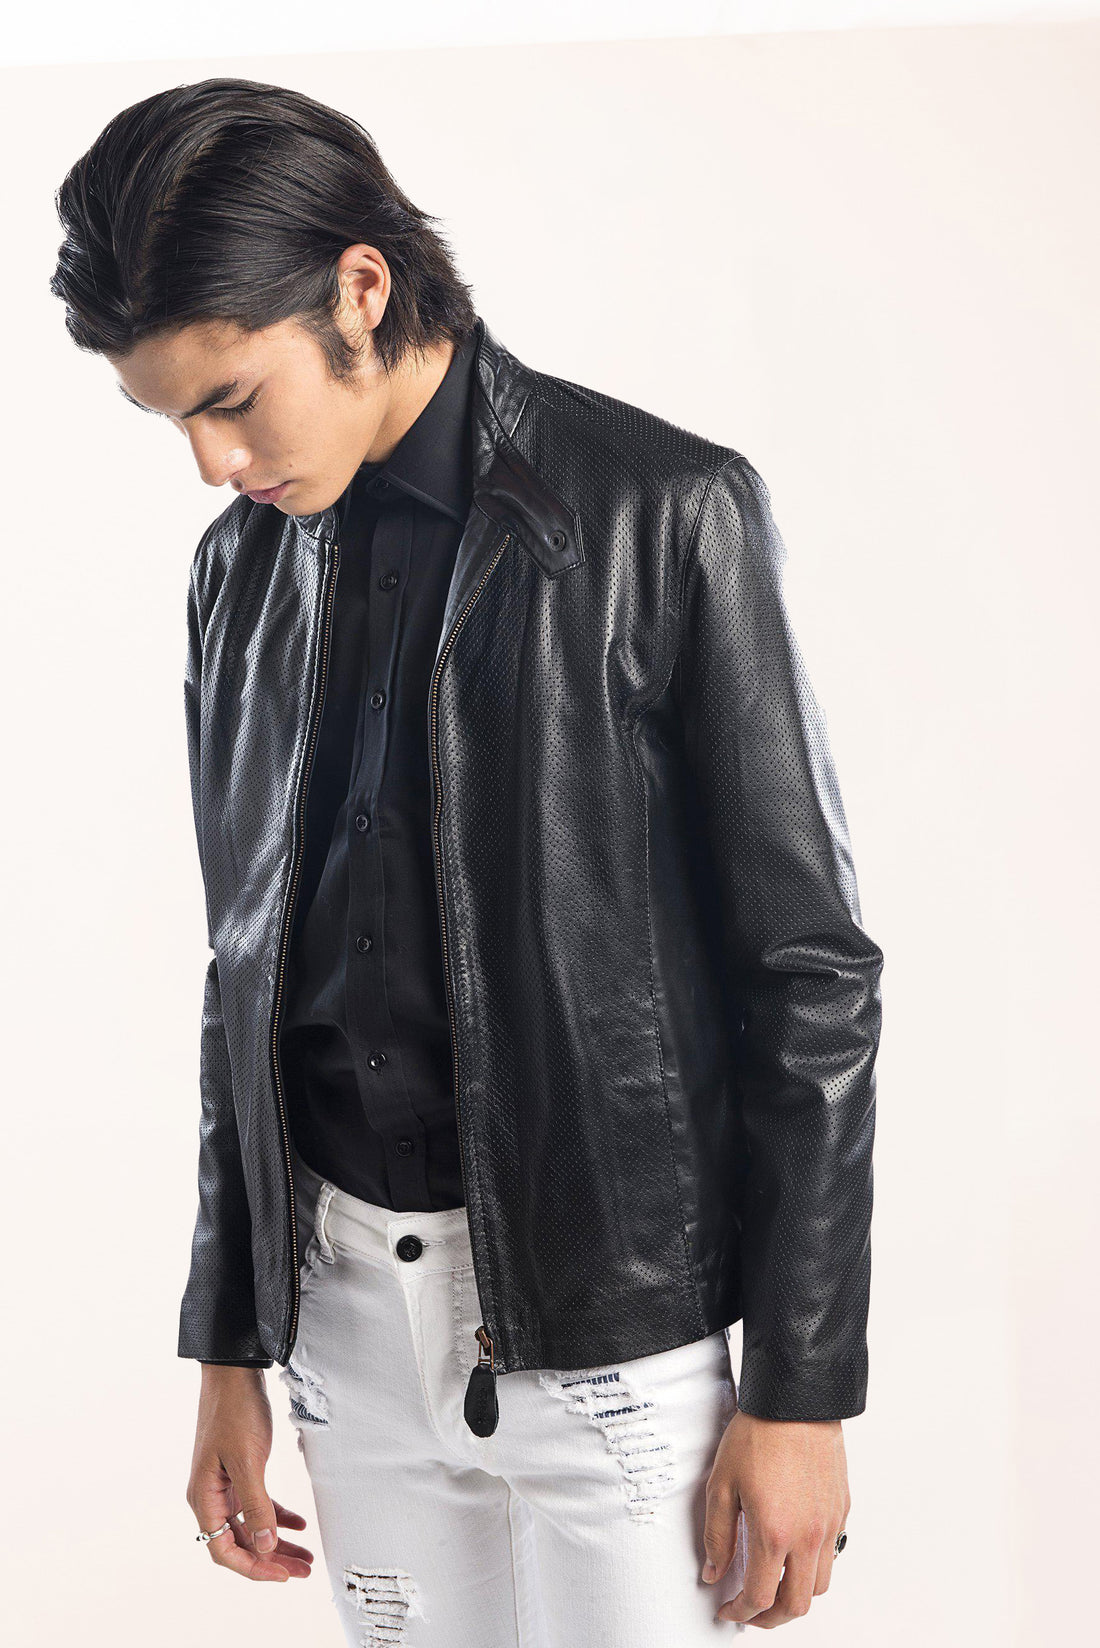 N° 7763 STAND COLLAR PUNCHED LAMBSKIN JACKET